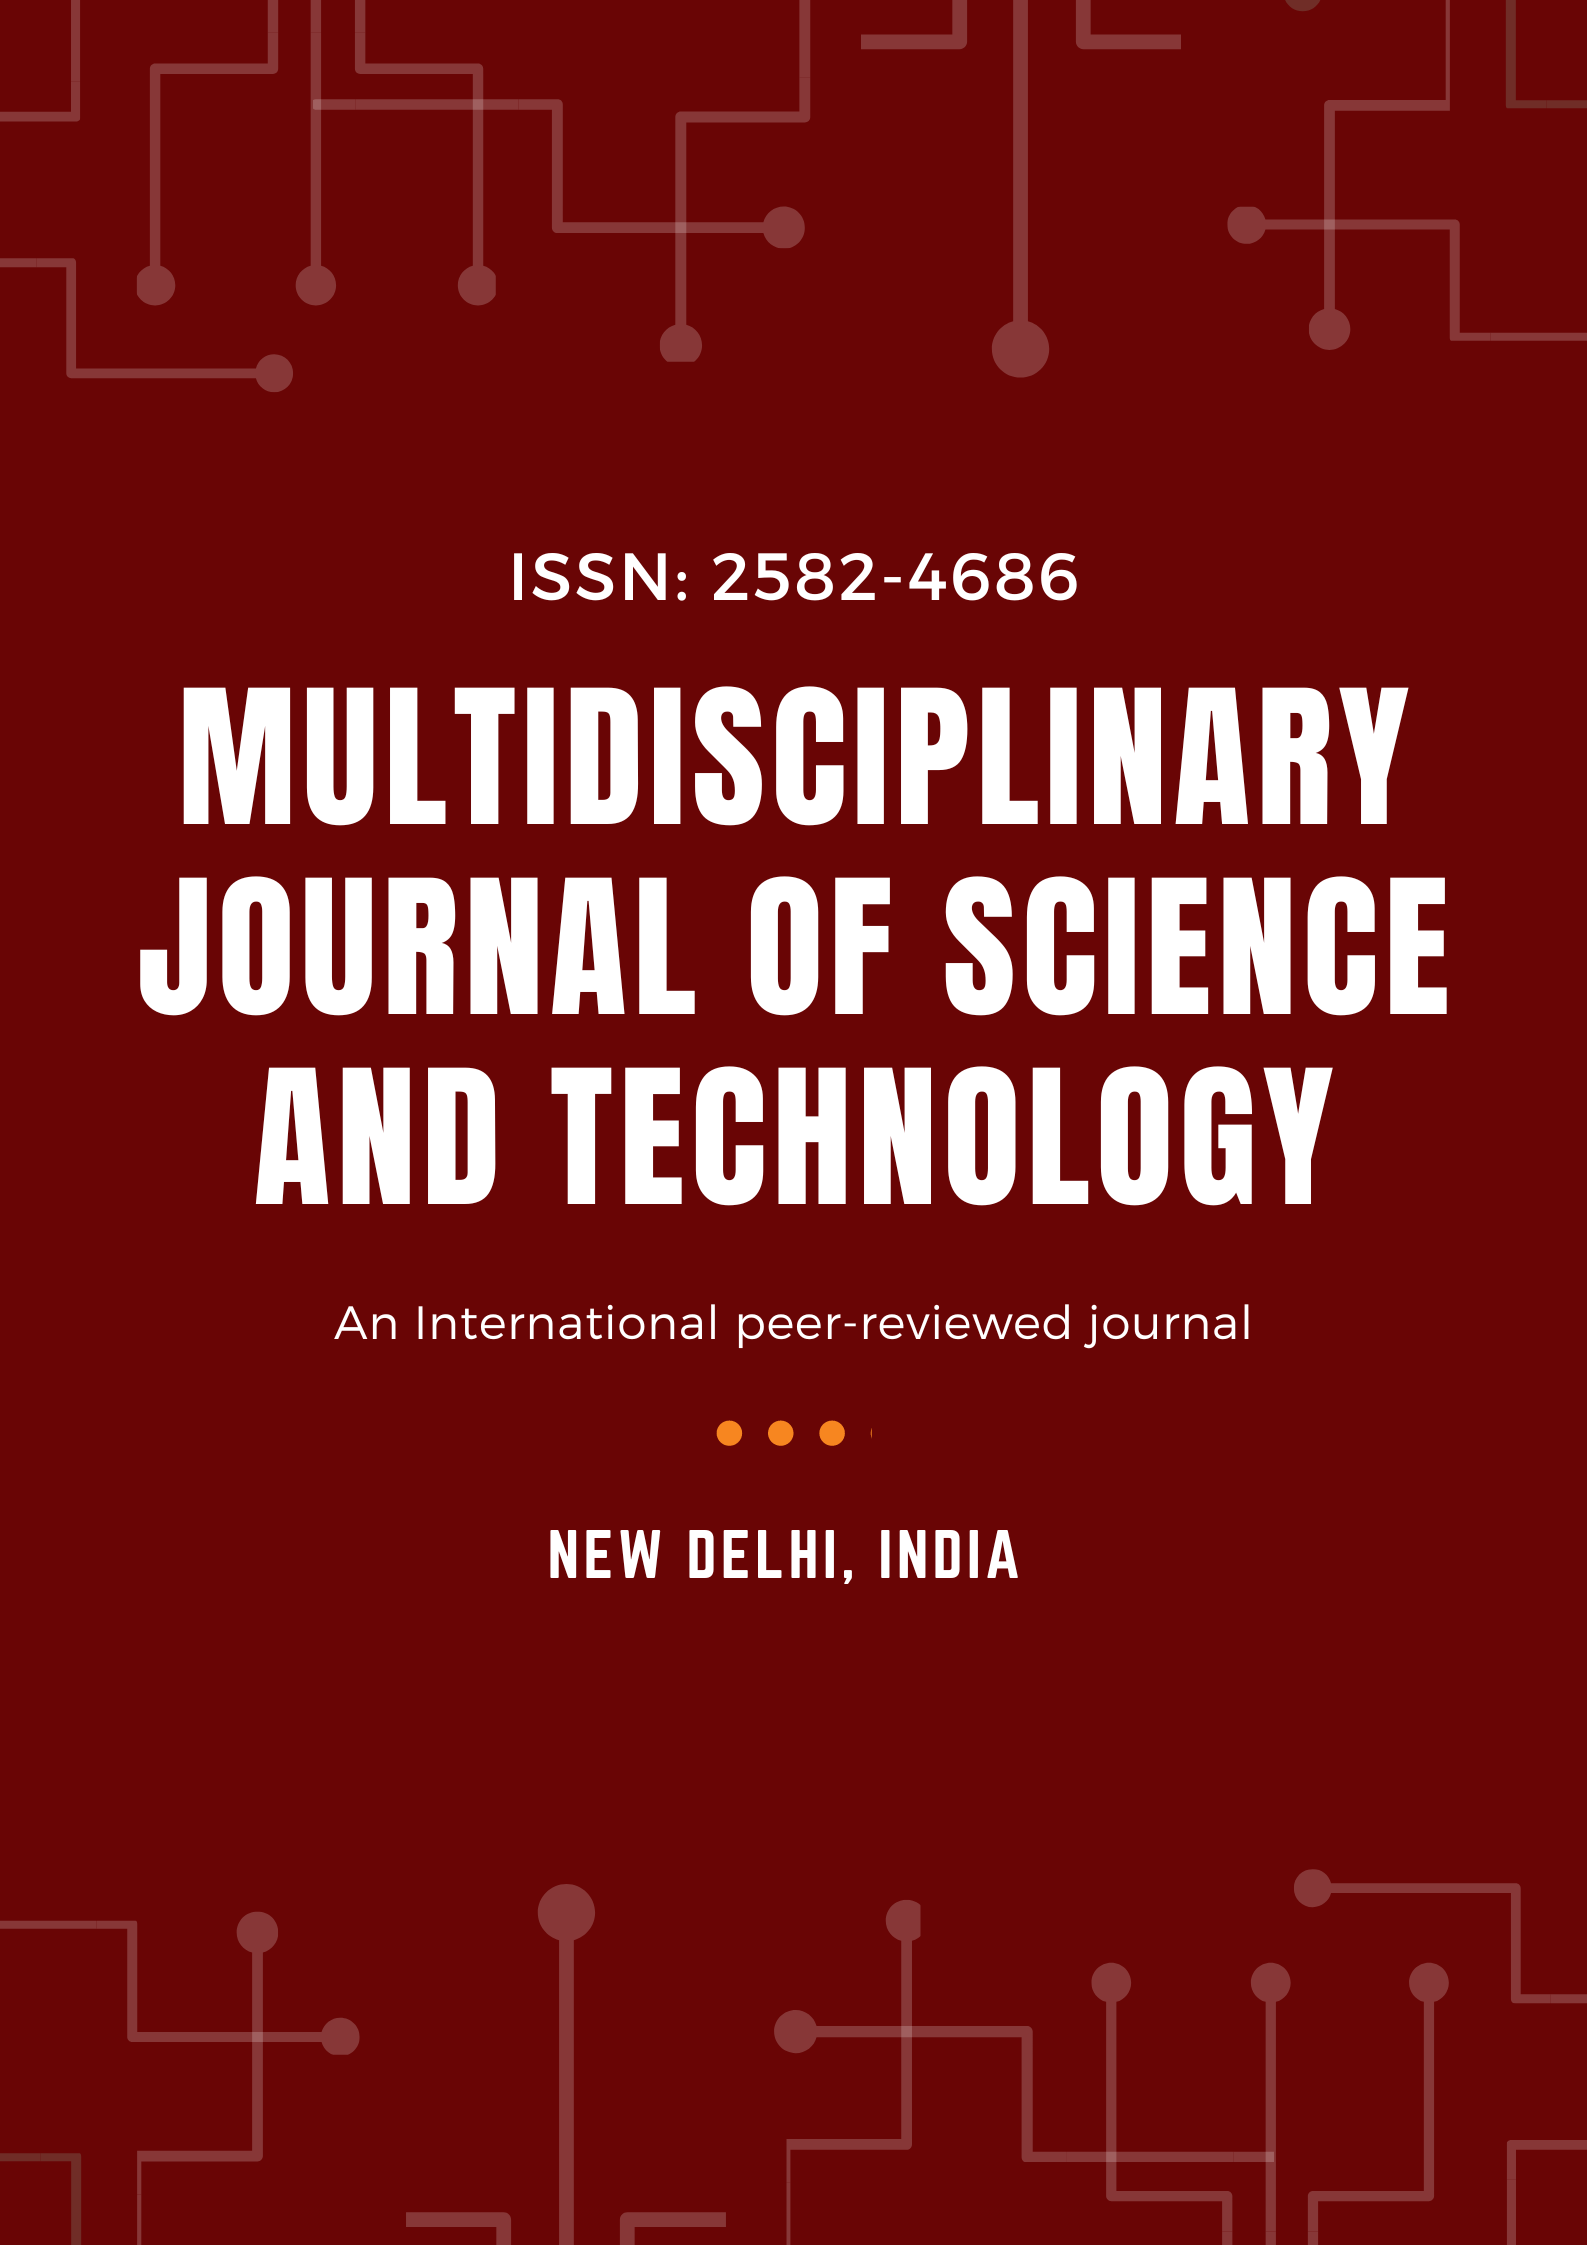                         View Vol. 2 No. 1 (2022): Multidisciplinary Journal of Science and Technology
                    